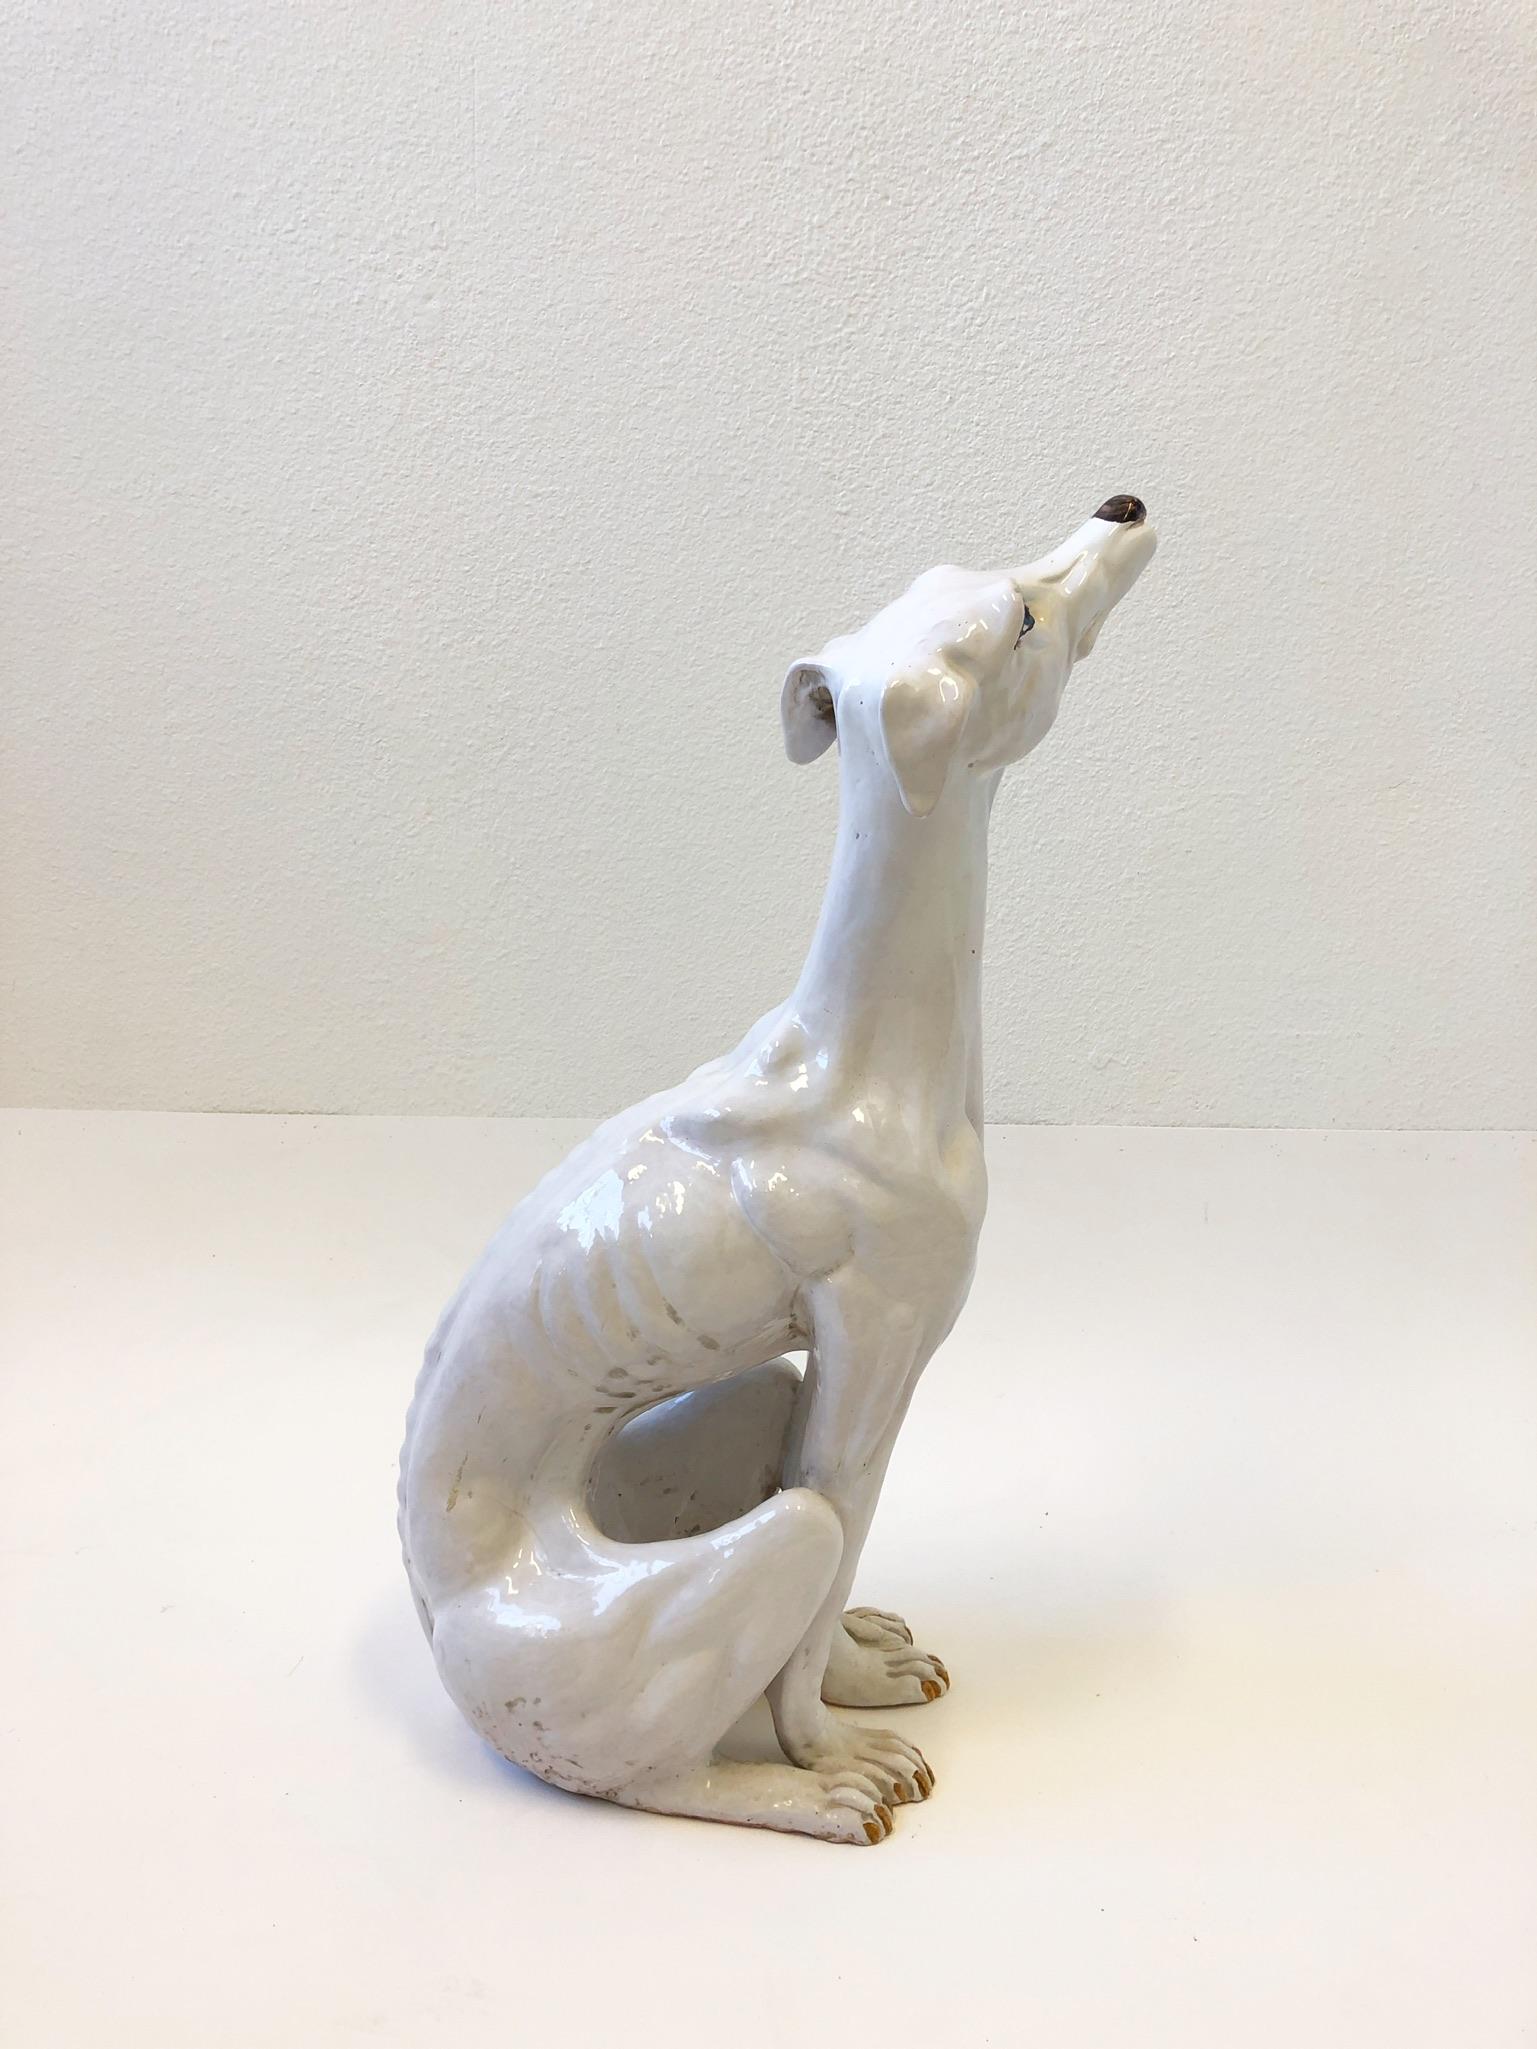 Beautiful Italian white ceramic blue eyes greyhound statue from the 1970’s.
Measurements: 26” high, 14” wide and 8” deep.